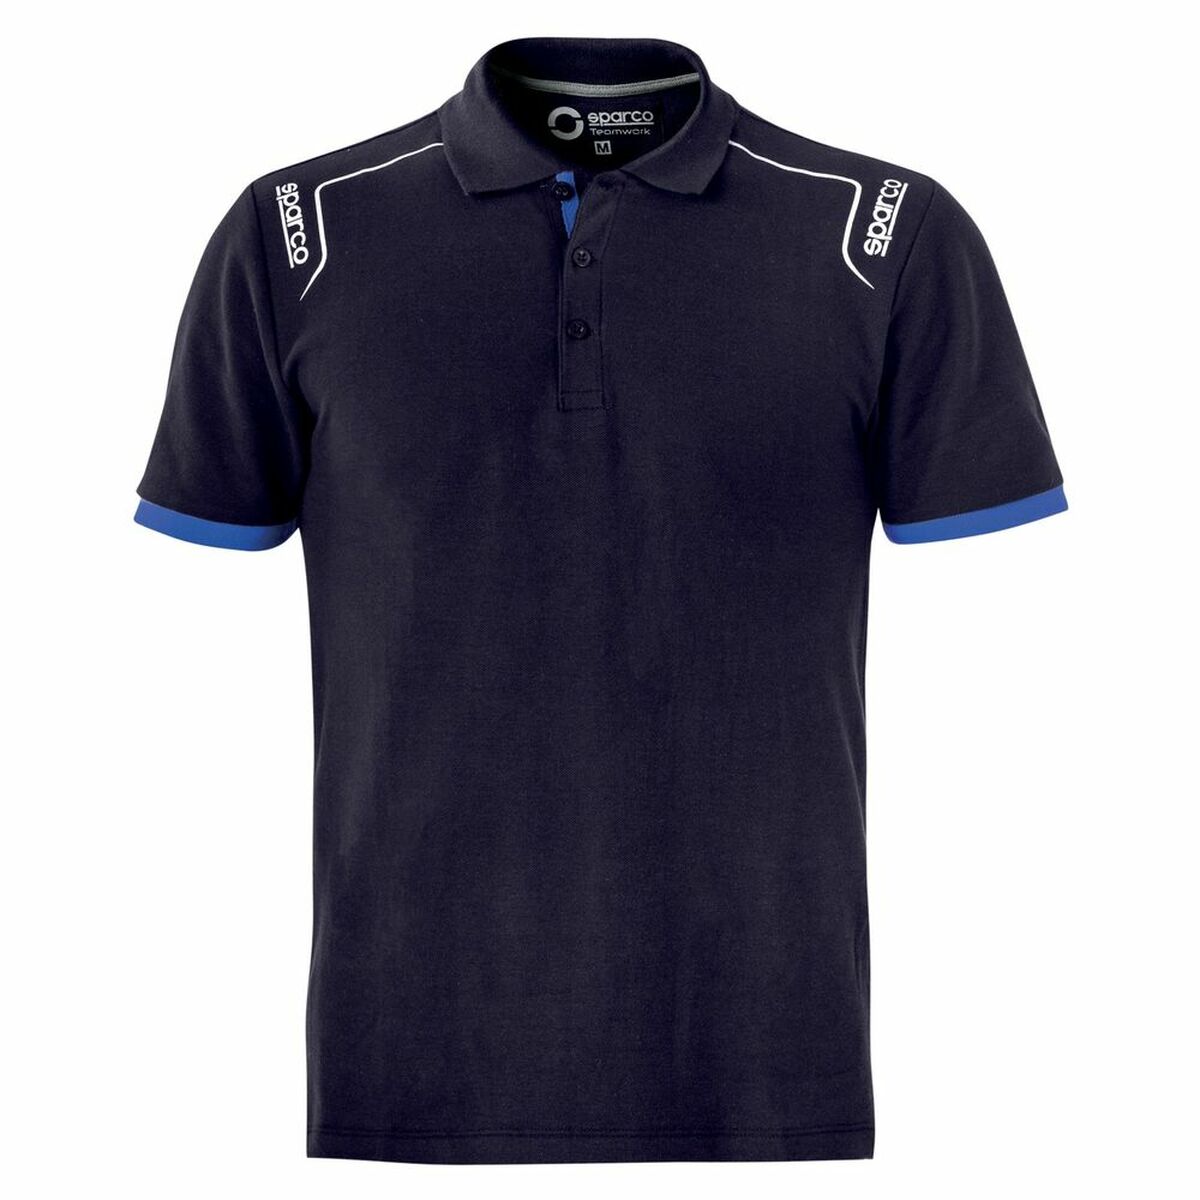 Polo à manches courtes Sparco STRETCH Blue marine (Taille M)